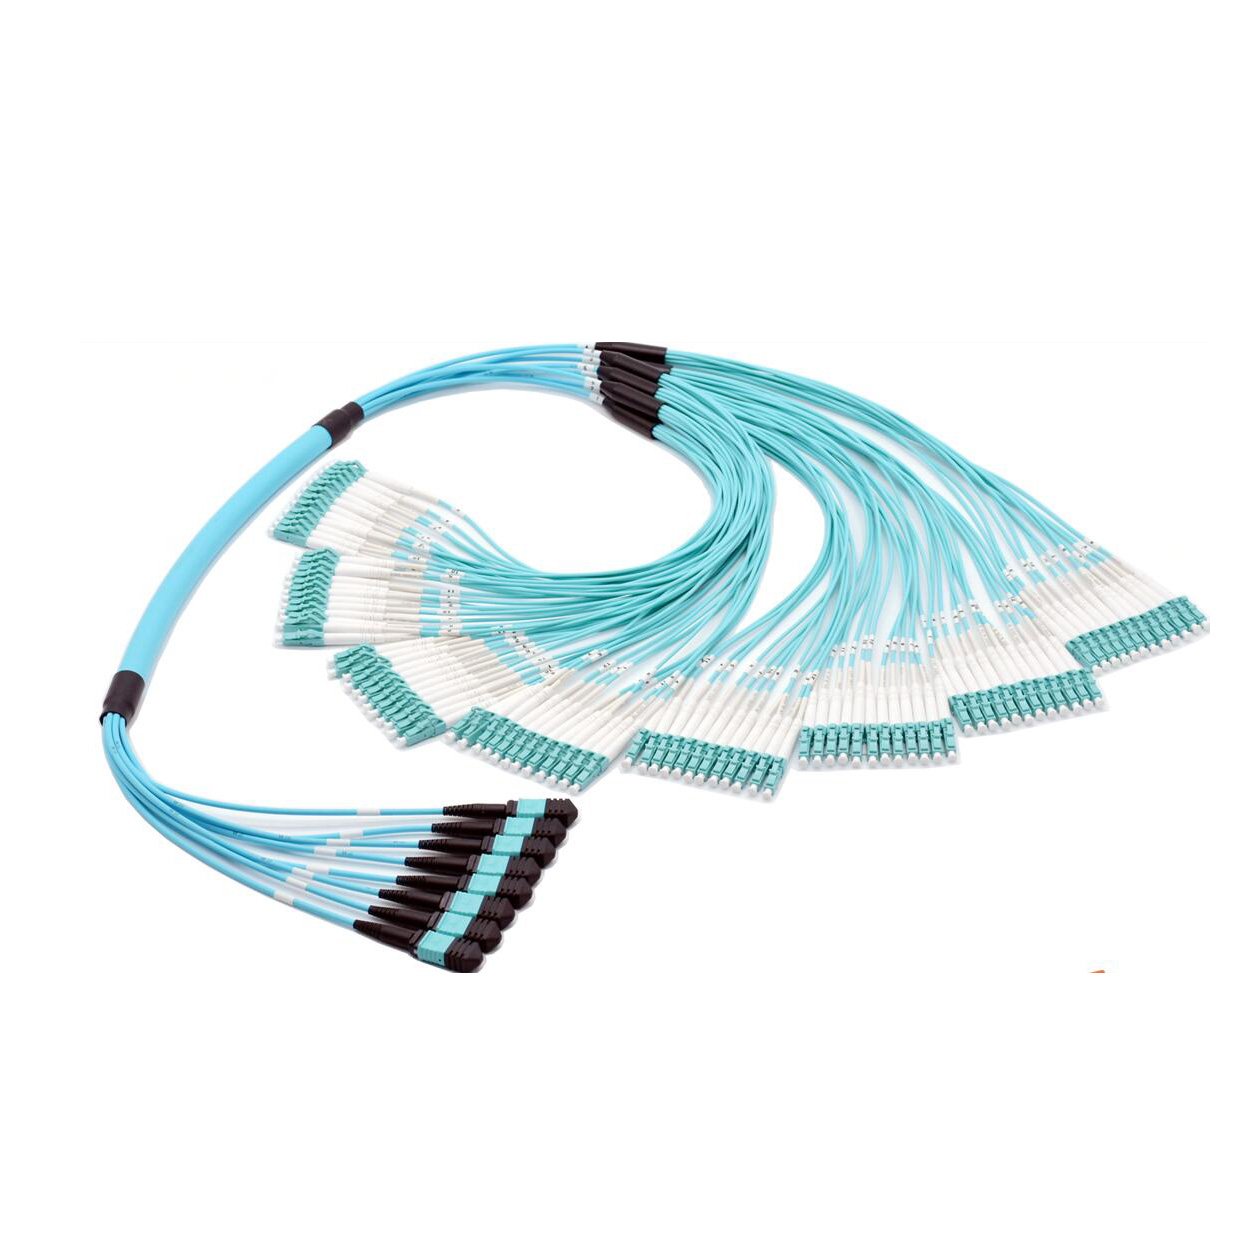 MPO / MTP Harness Patch Cord